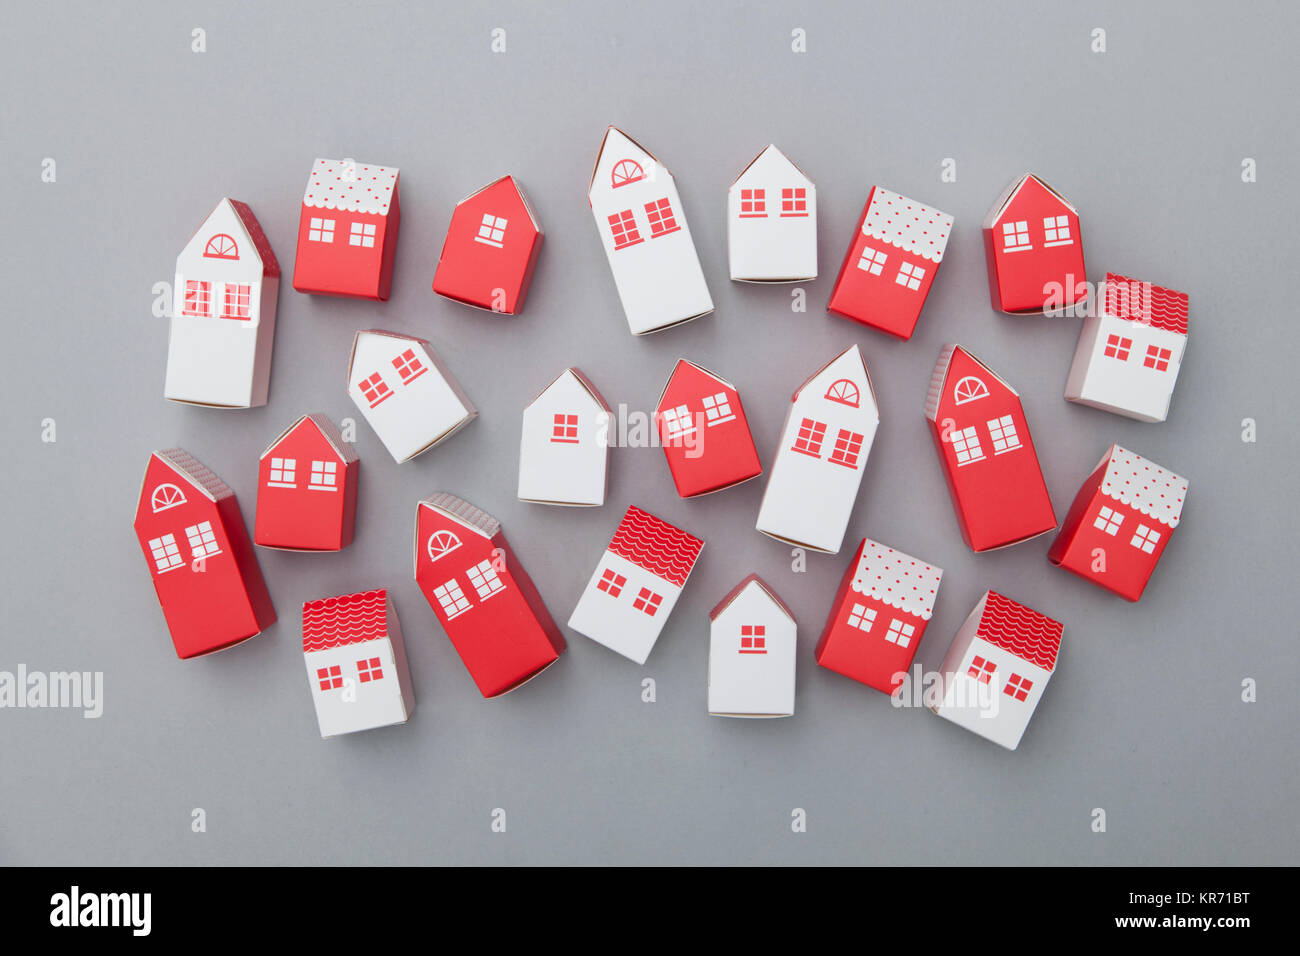 Collection of red and white houses background Stock Photo